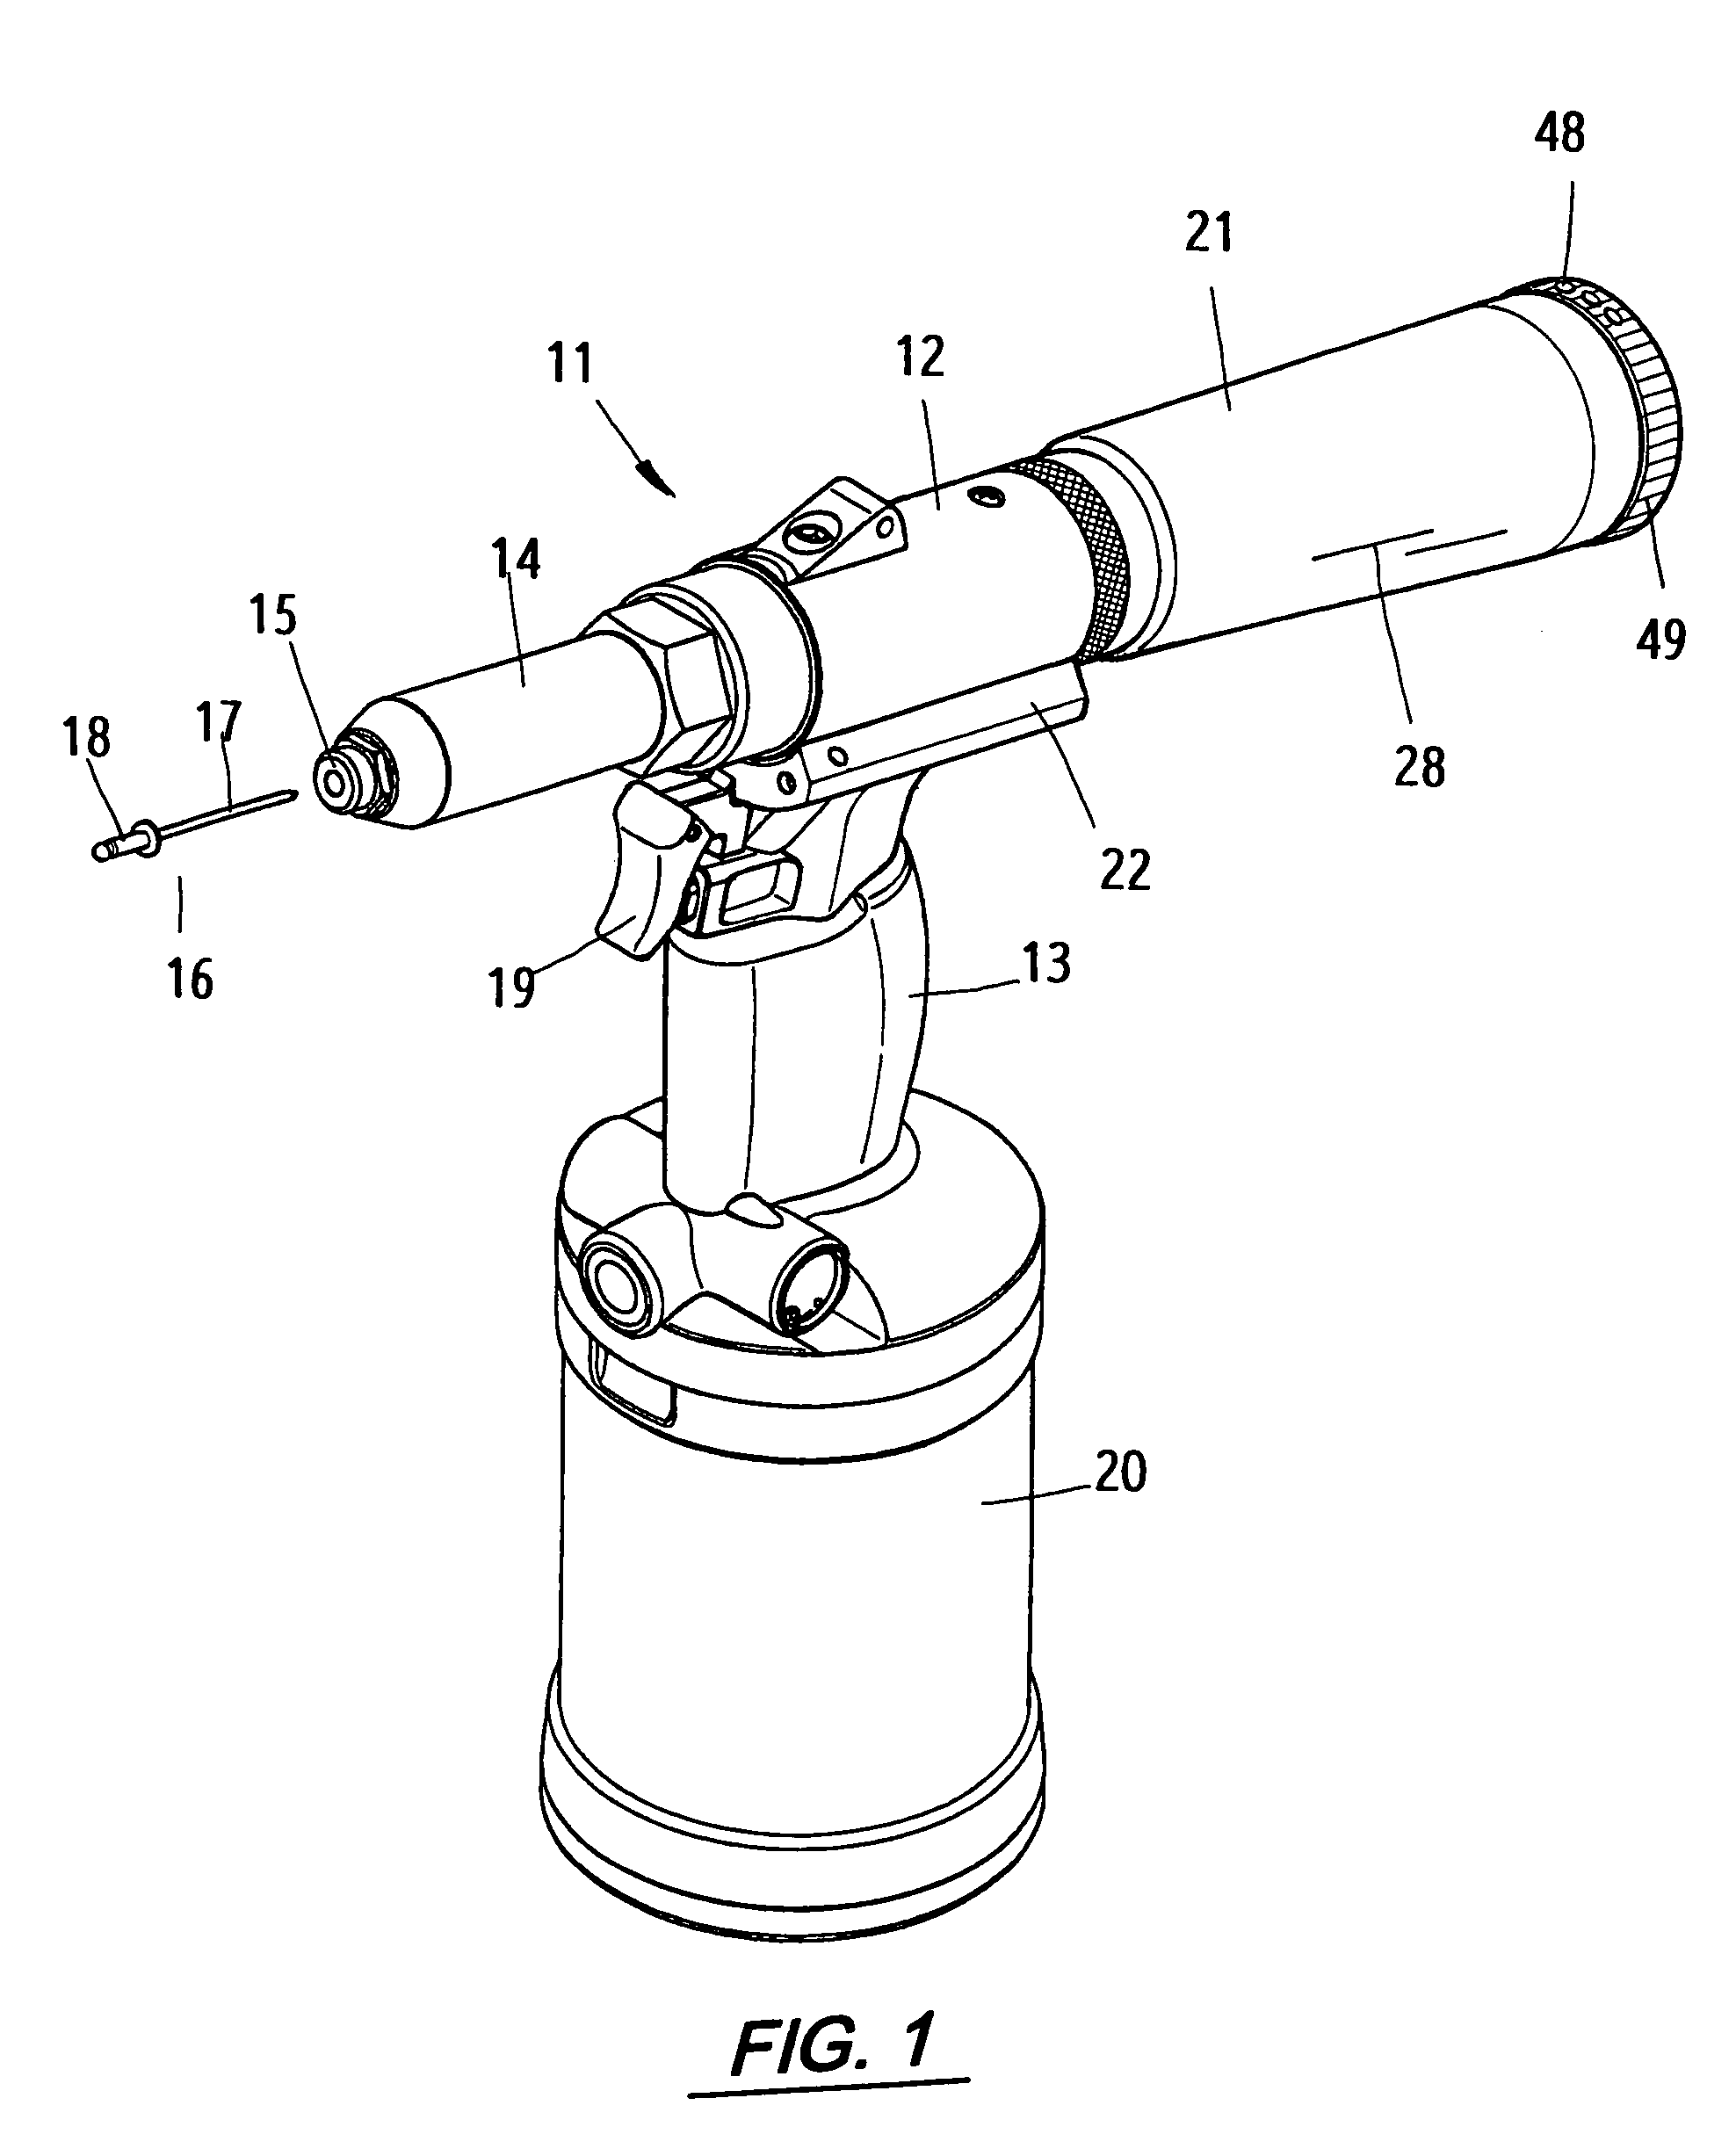 Automatic suction and repelling device for rivet gun